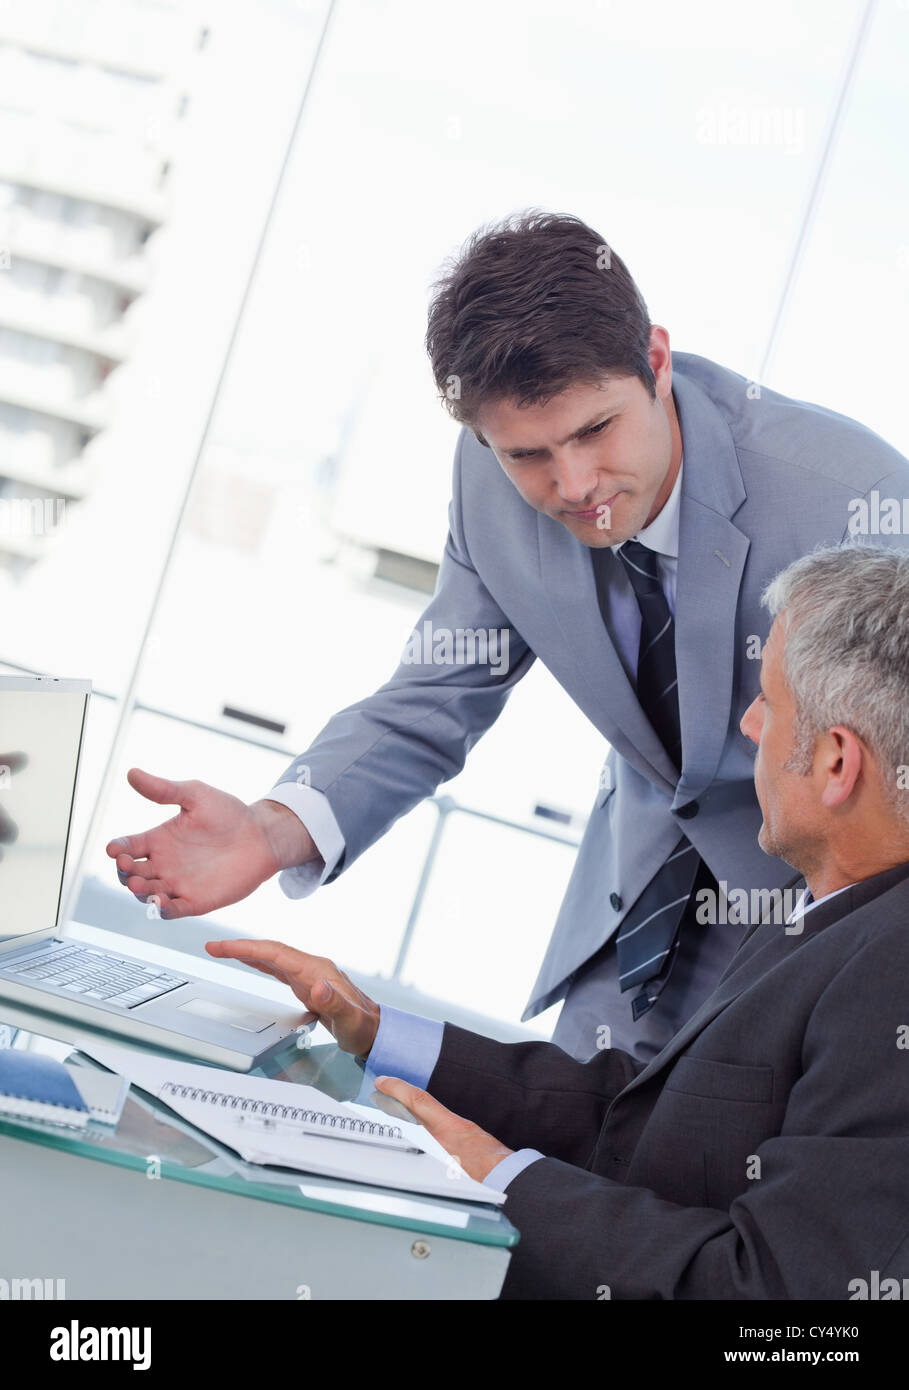 Portrait of professional businessmen working with a laptop Stock Photo